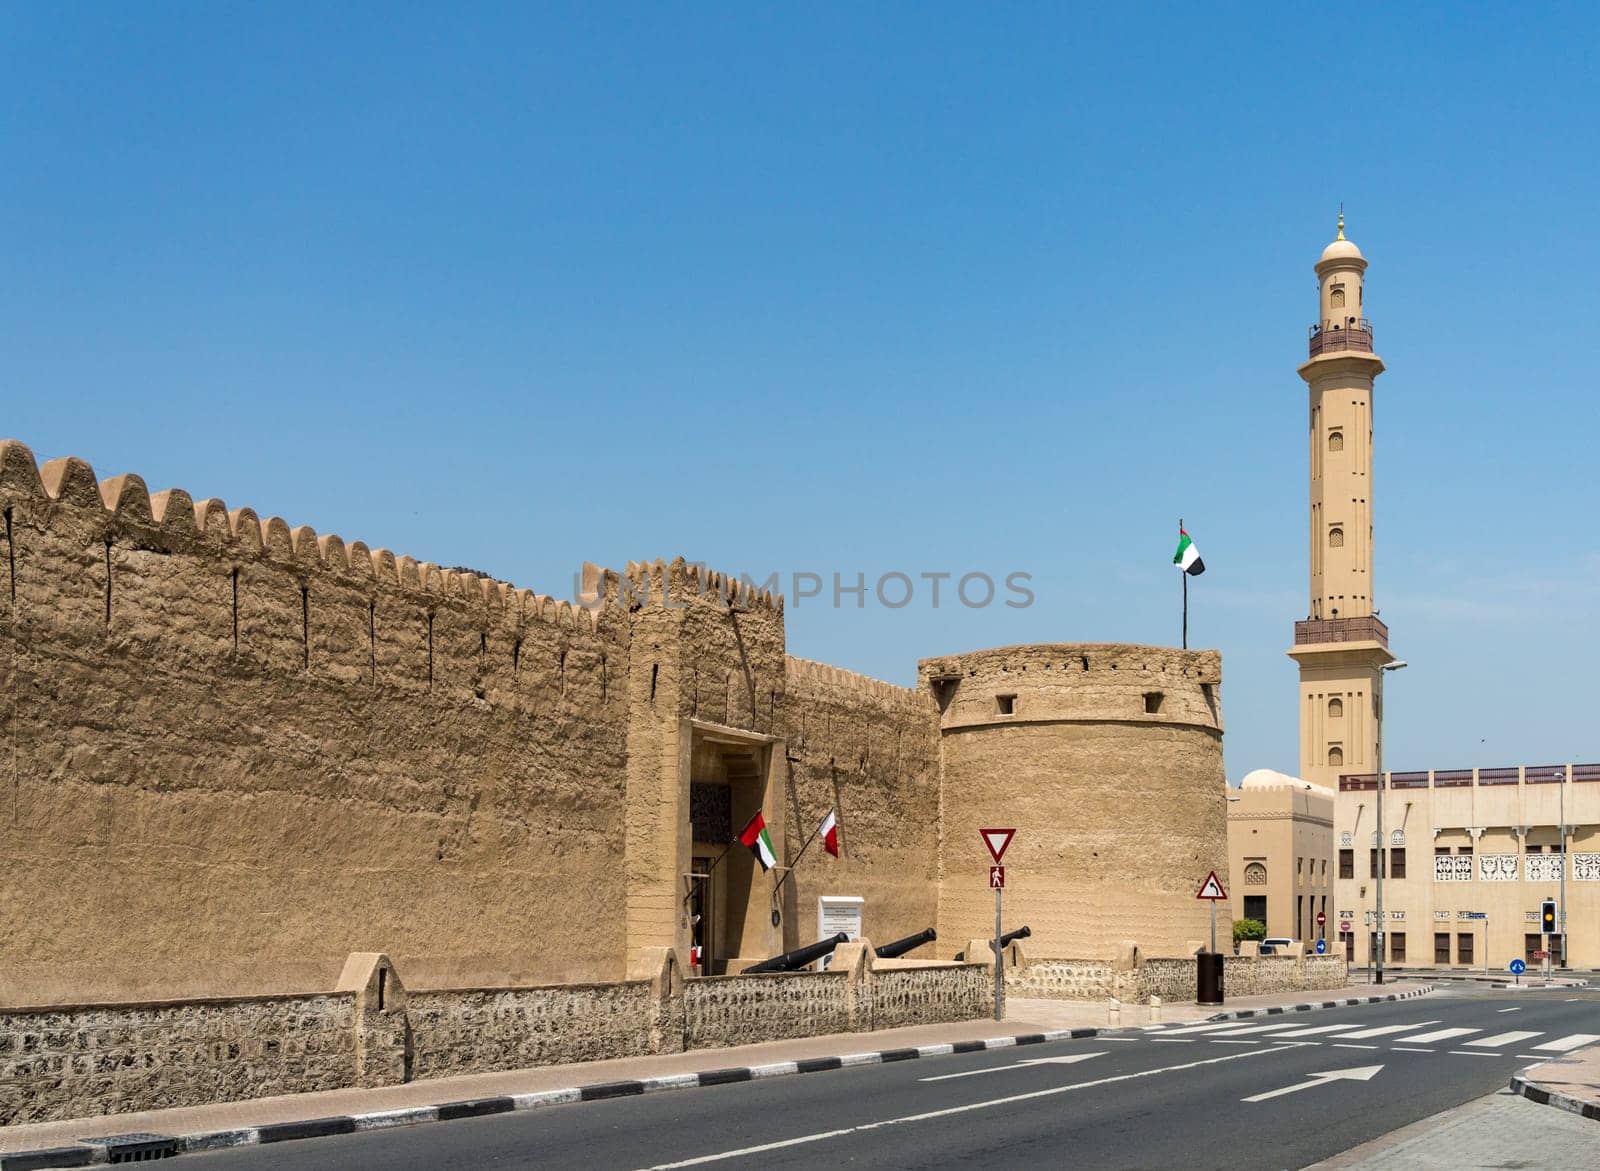 Entrance to the old fortress housing the museum in Bur Dubai with mosque in background